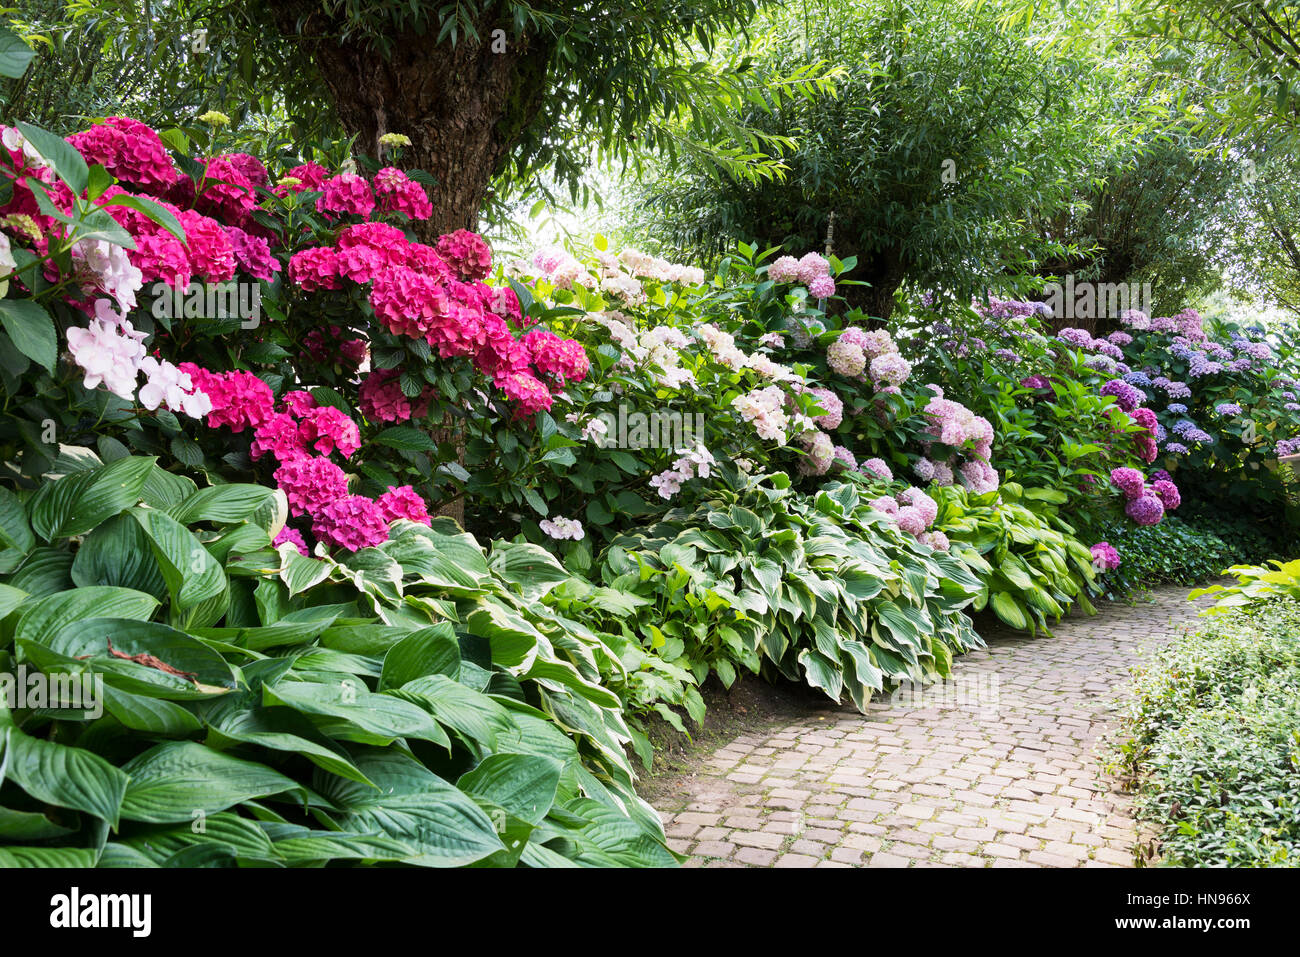 english garden full of flowering plants as azalea and rhododendrons Stock Photo